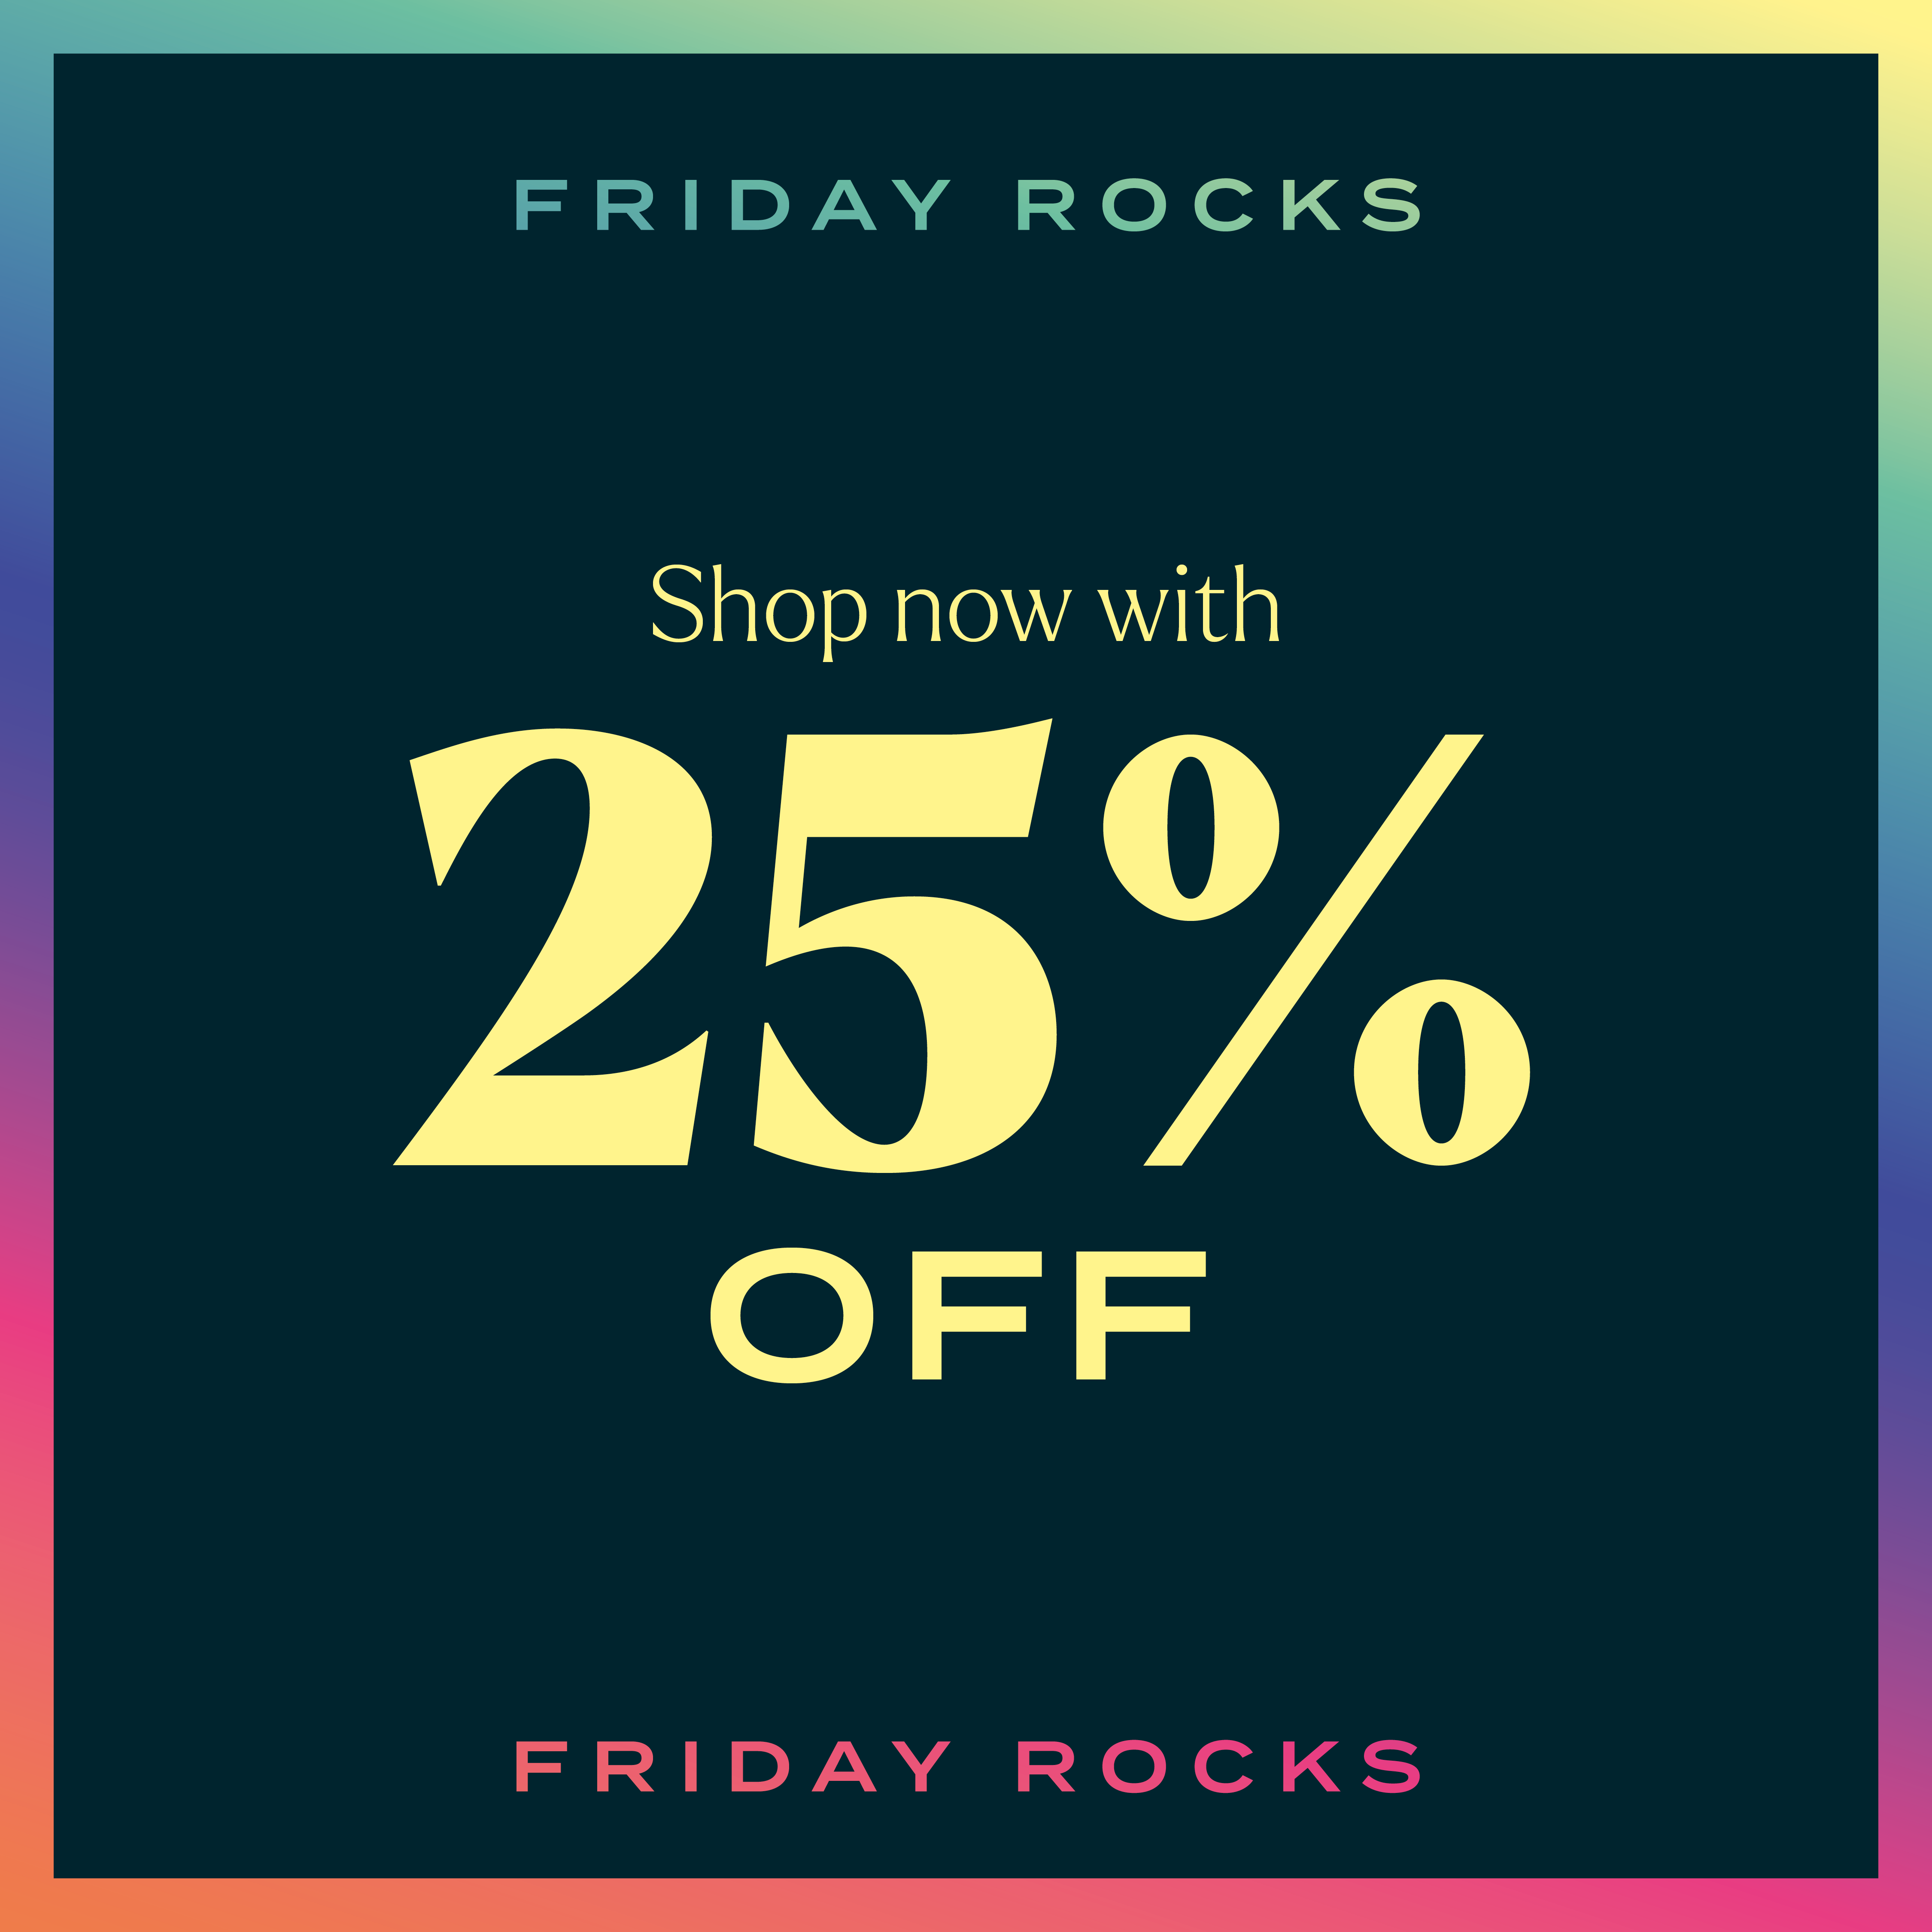 FRIDAY ROCKS OFFER IS NOW LIVE